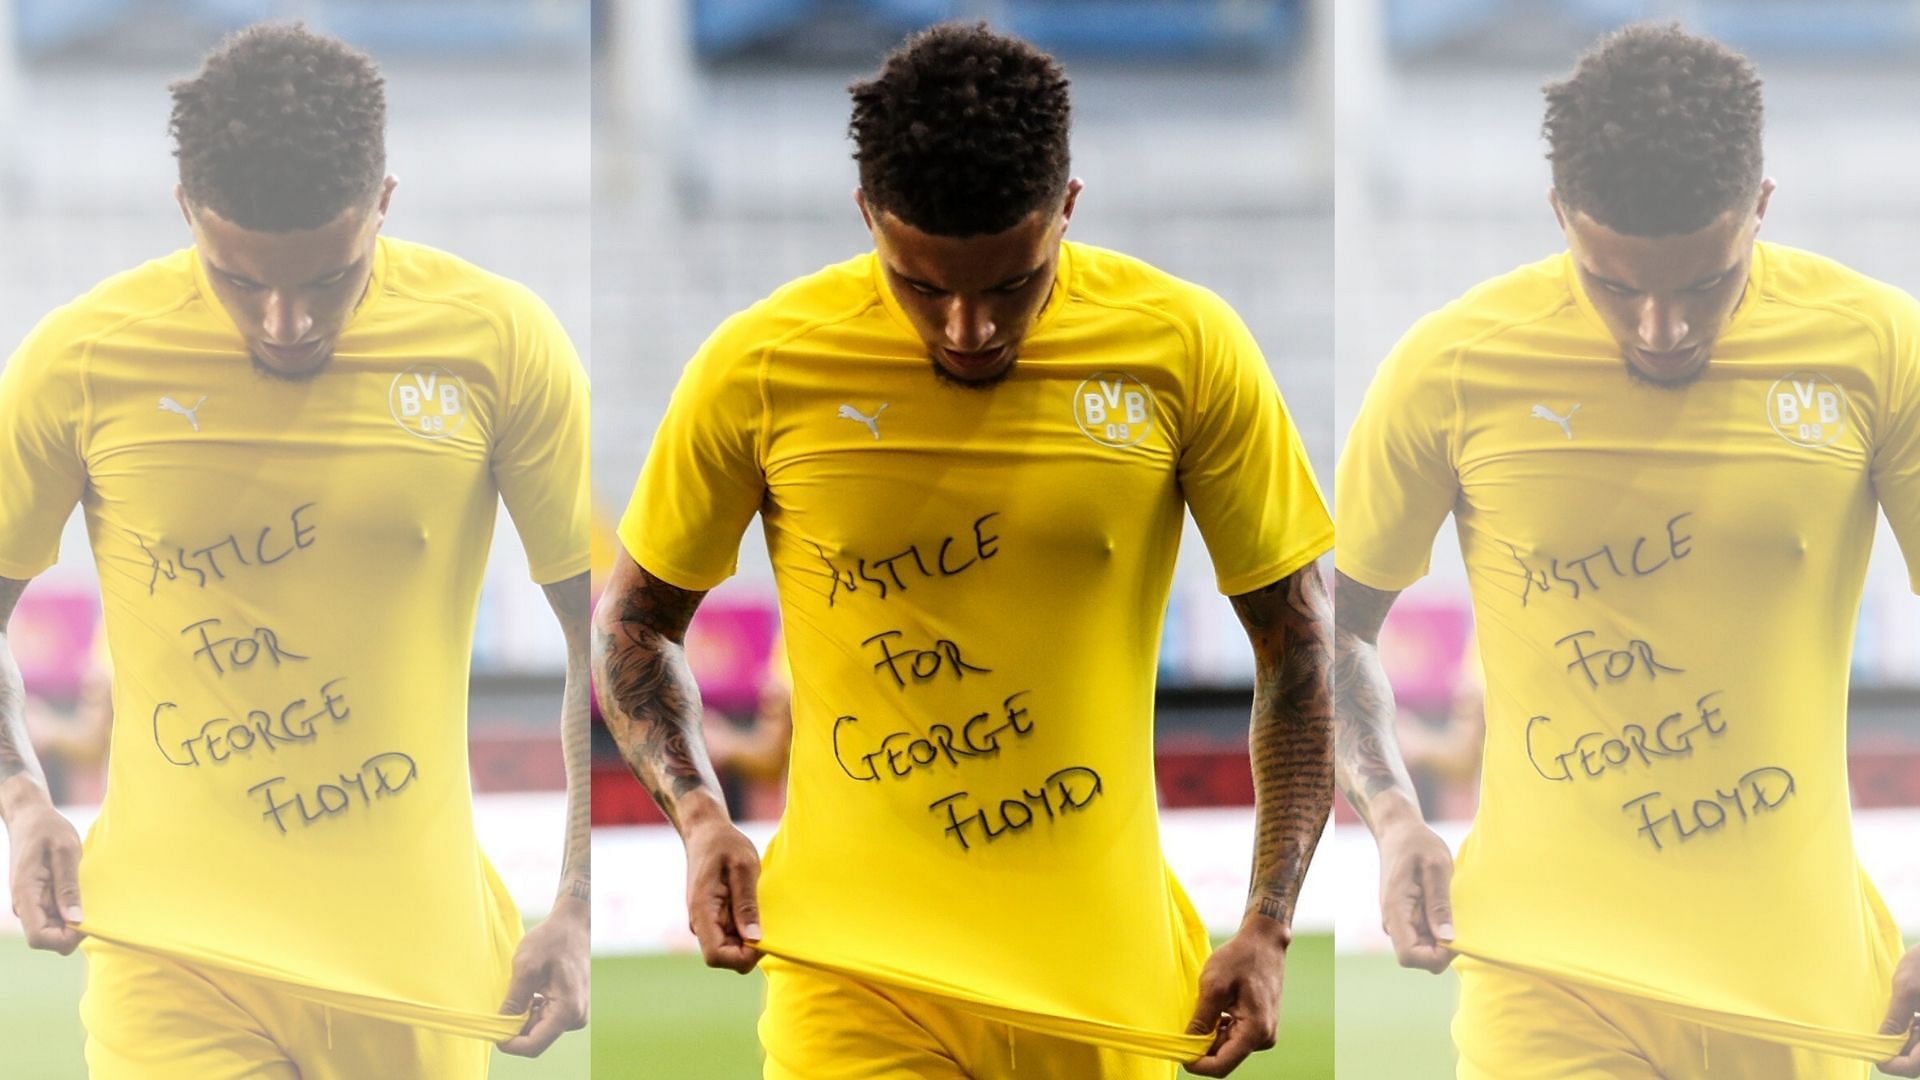 Jadon Sancho paid tribute to George Floyd after scoring his first professional hat-trick during a&nbsp; Bundesliga match.